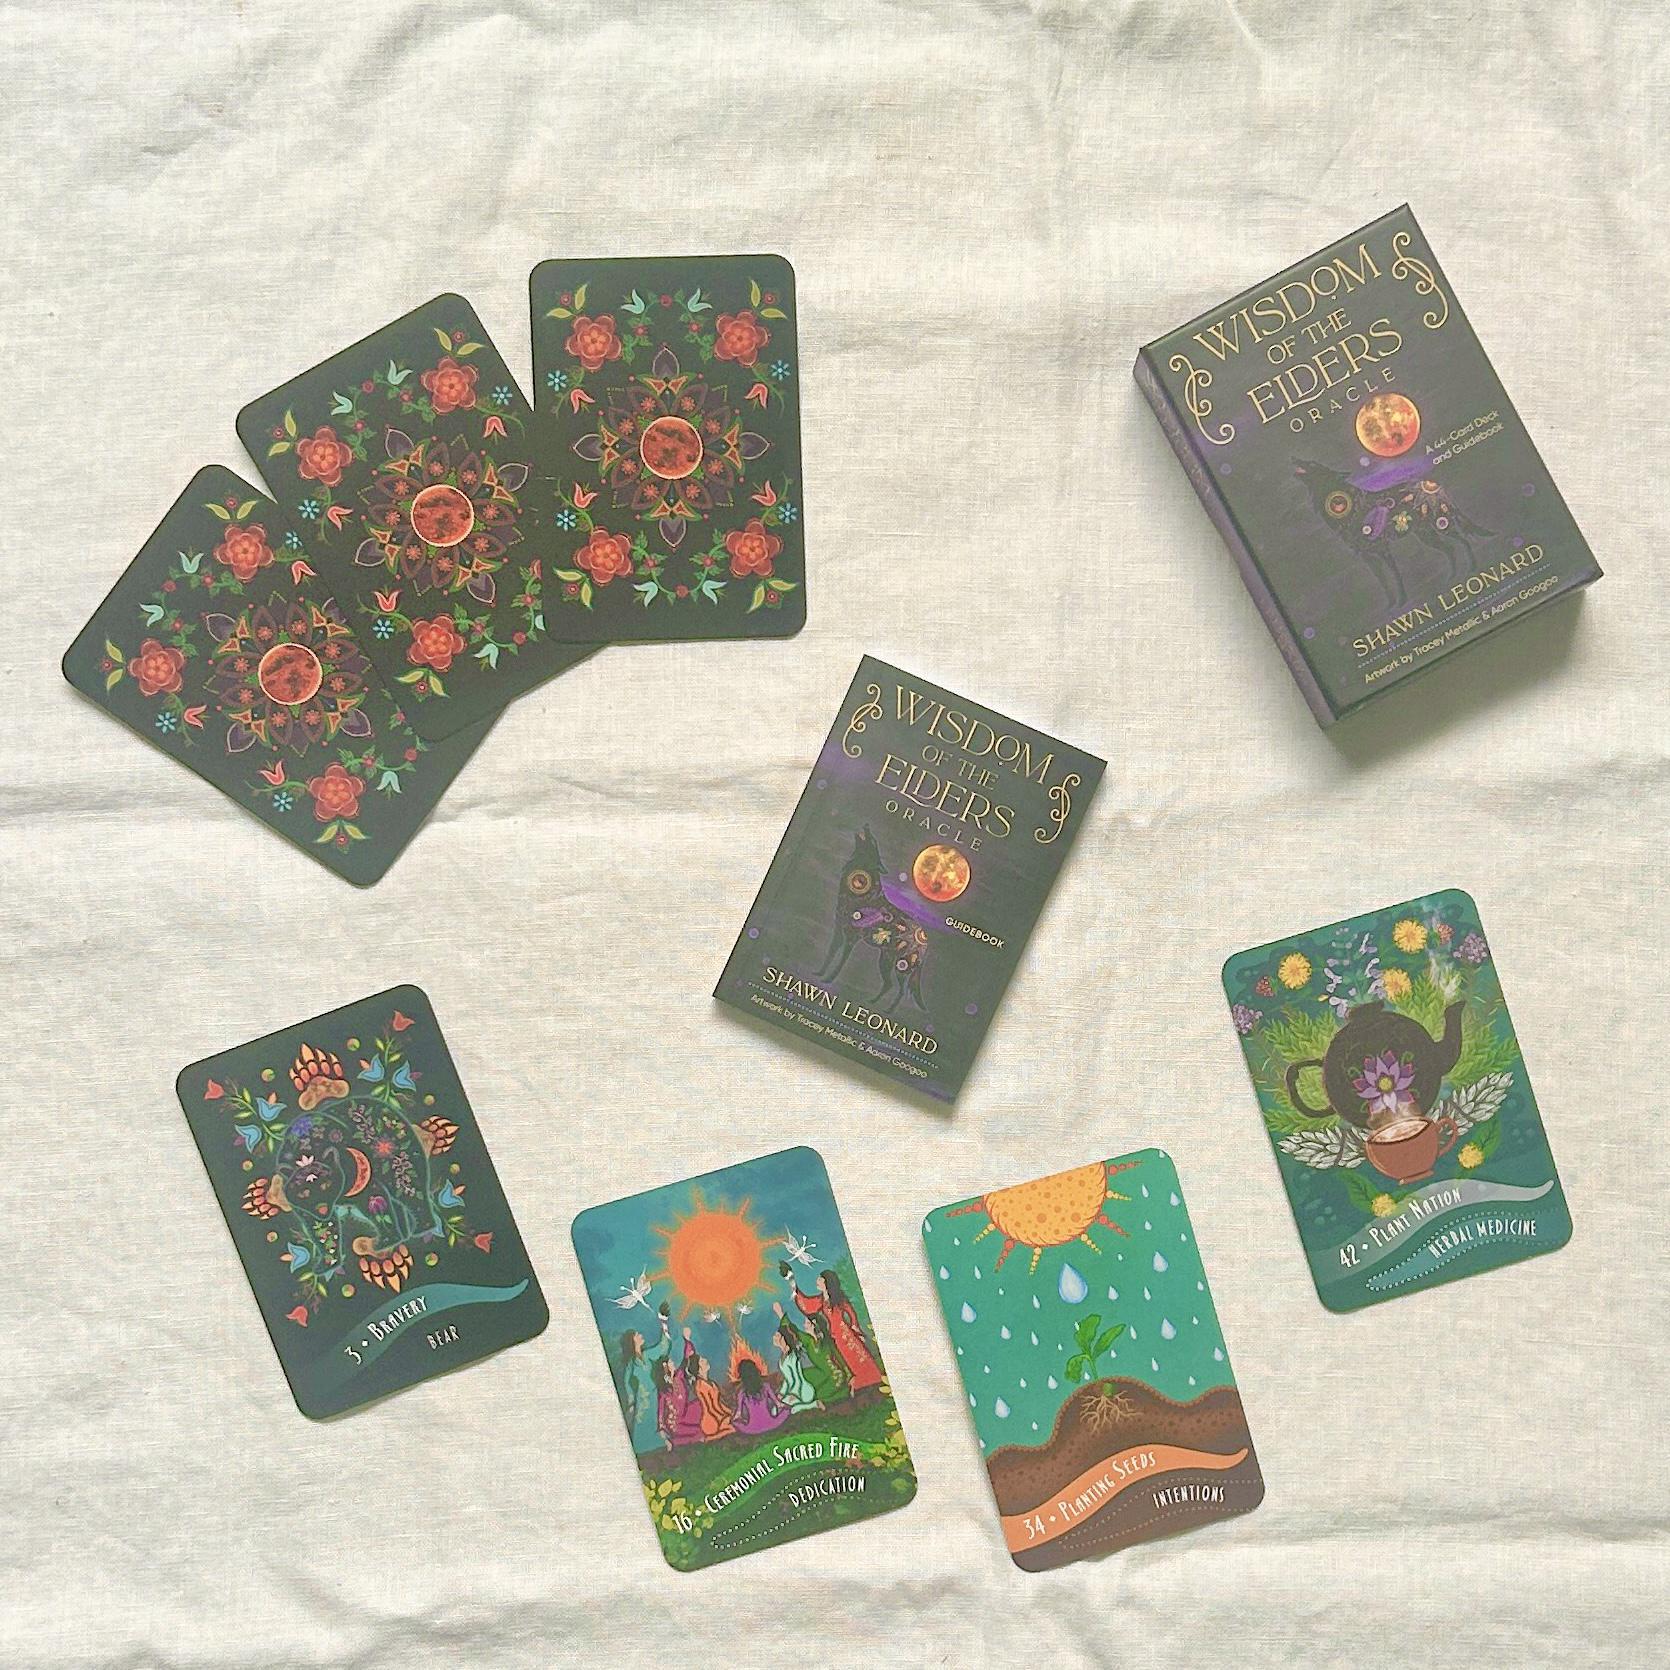 Wisdom of the Elders Oracle. A 44-card oracle deck focusing on the teachings, traditions, and wisdom of the Mi’kmaq people, meant to help the reader create a deeper connection with the spirit world and Mother Earth.